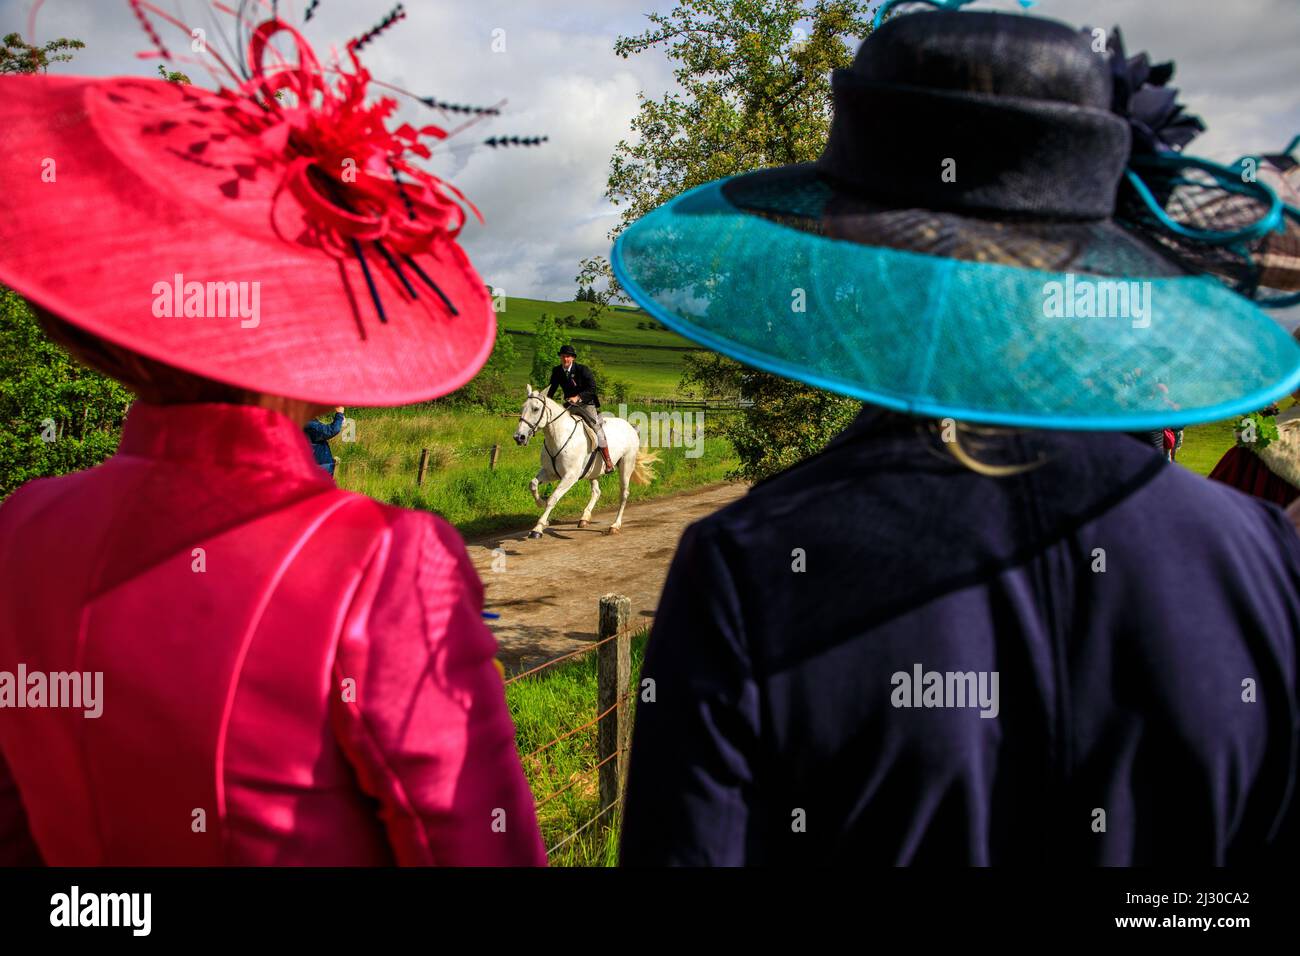 Spectators, horse racing, cross country, traditional, Hawick Common Ridings, guests of honor, elegant hats, Borders, Scotland, UK Stock Photo